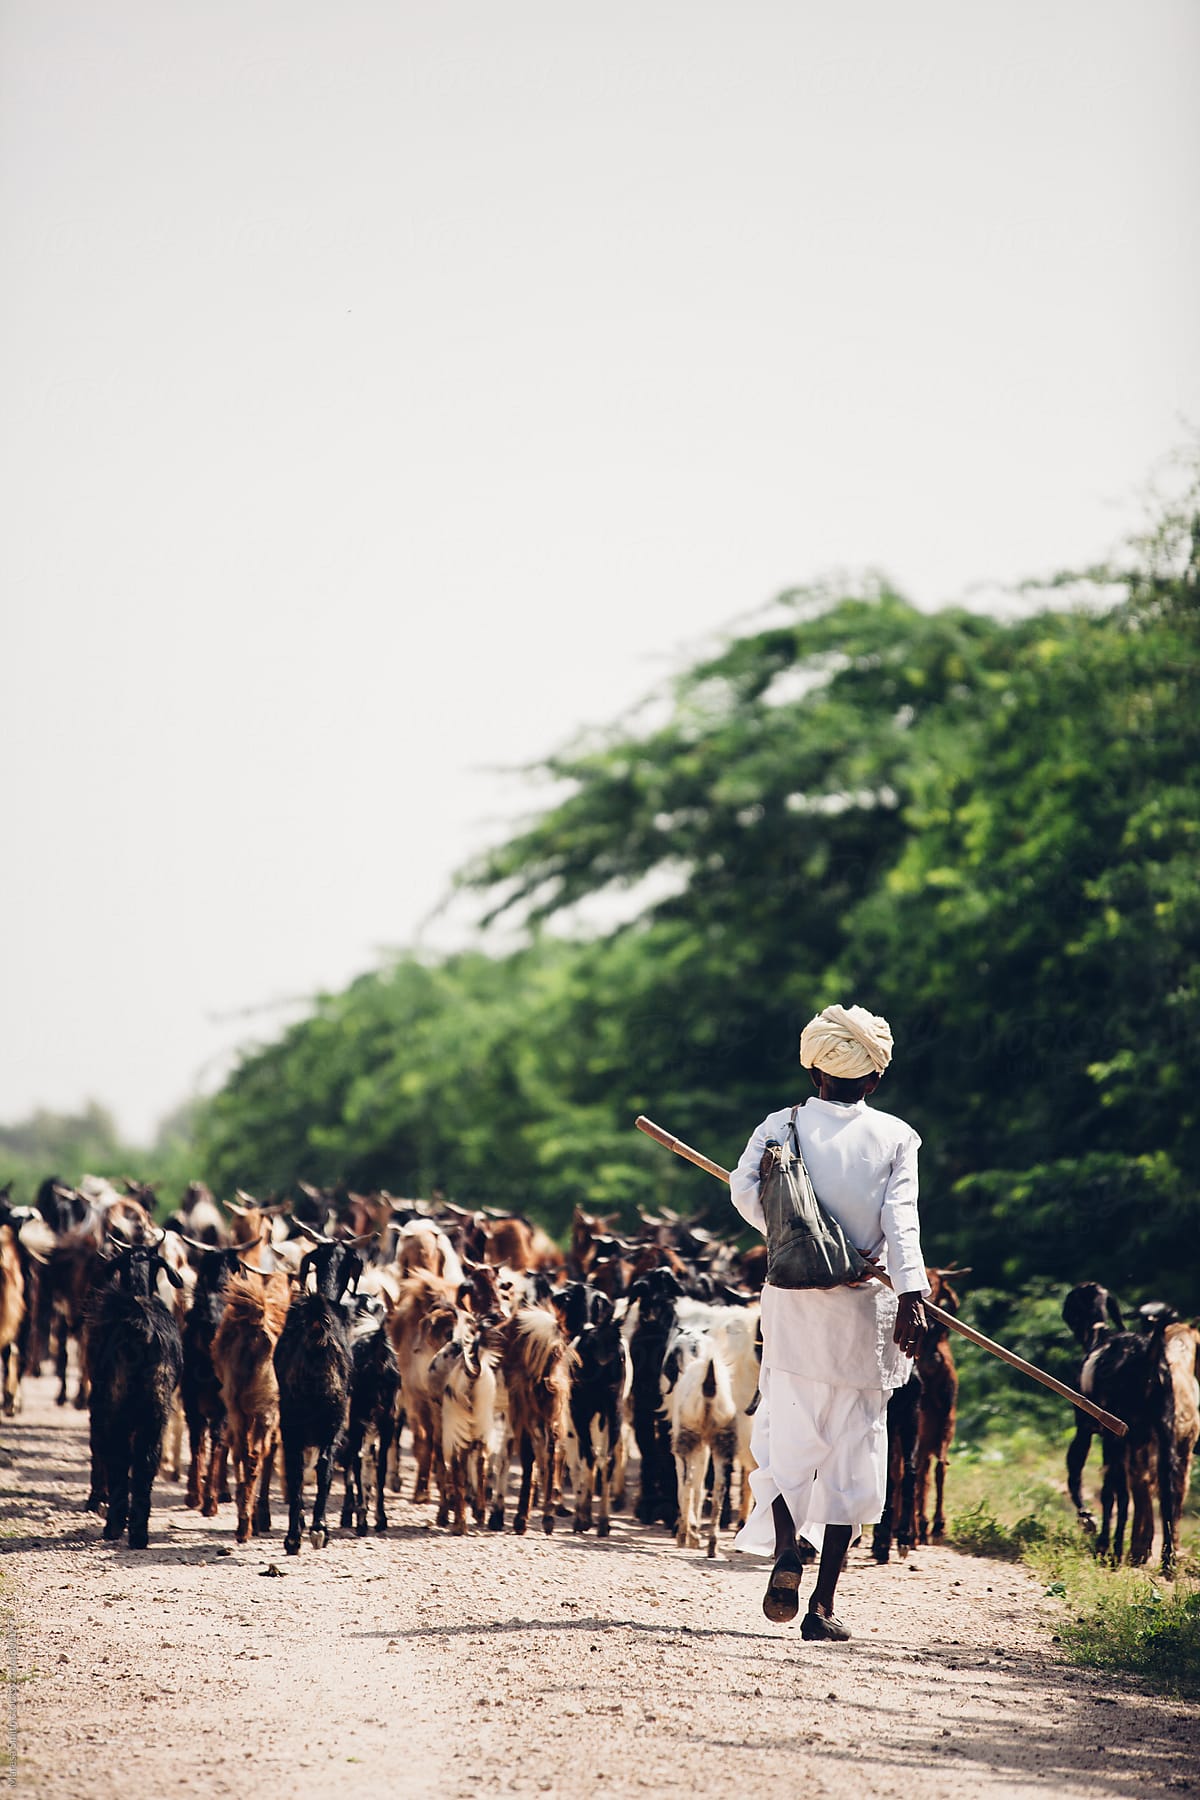 An Indian shepherd walking away on the dusty road with his herd of goats